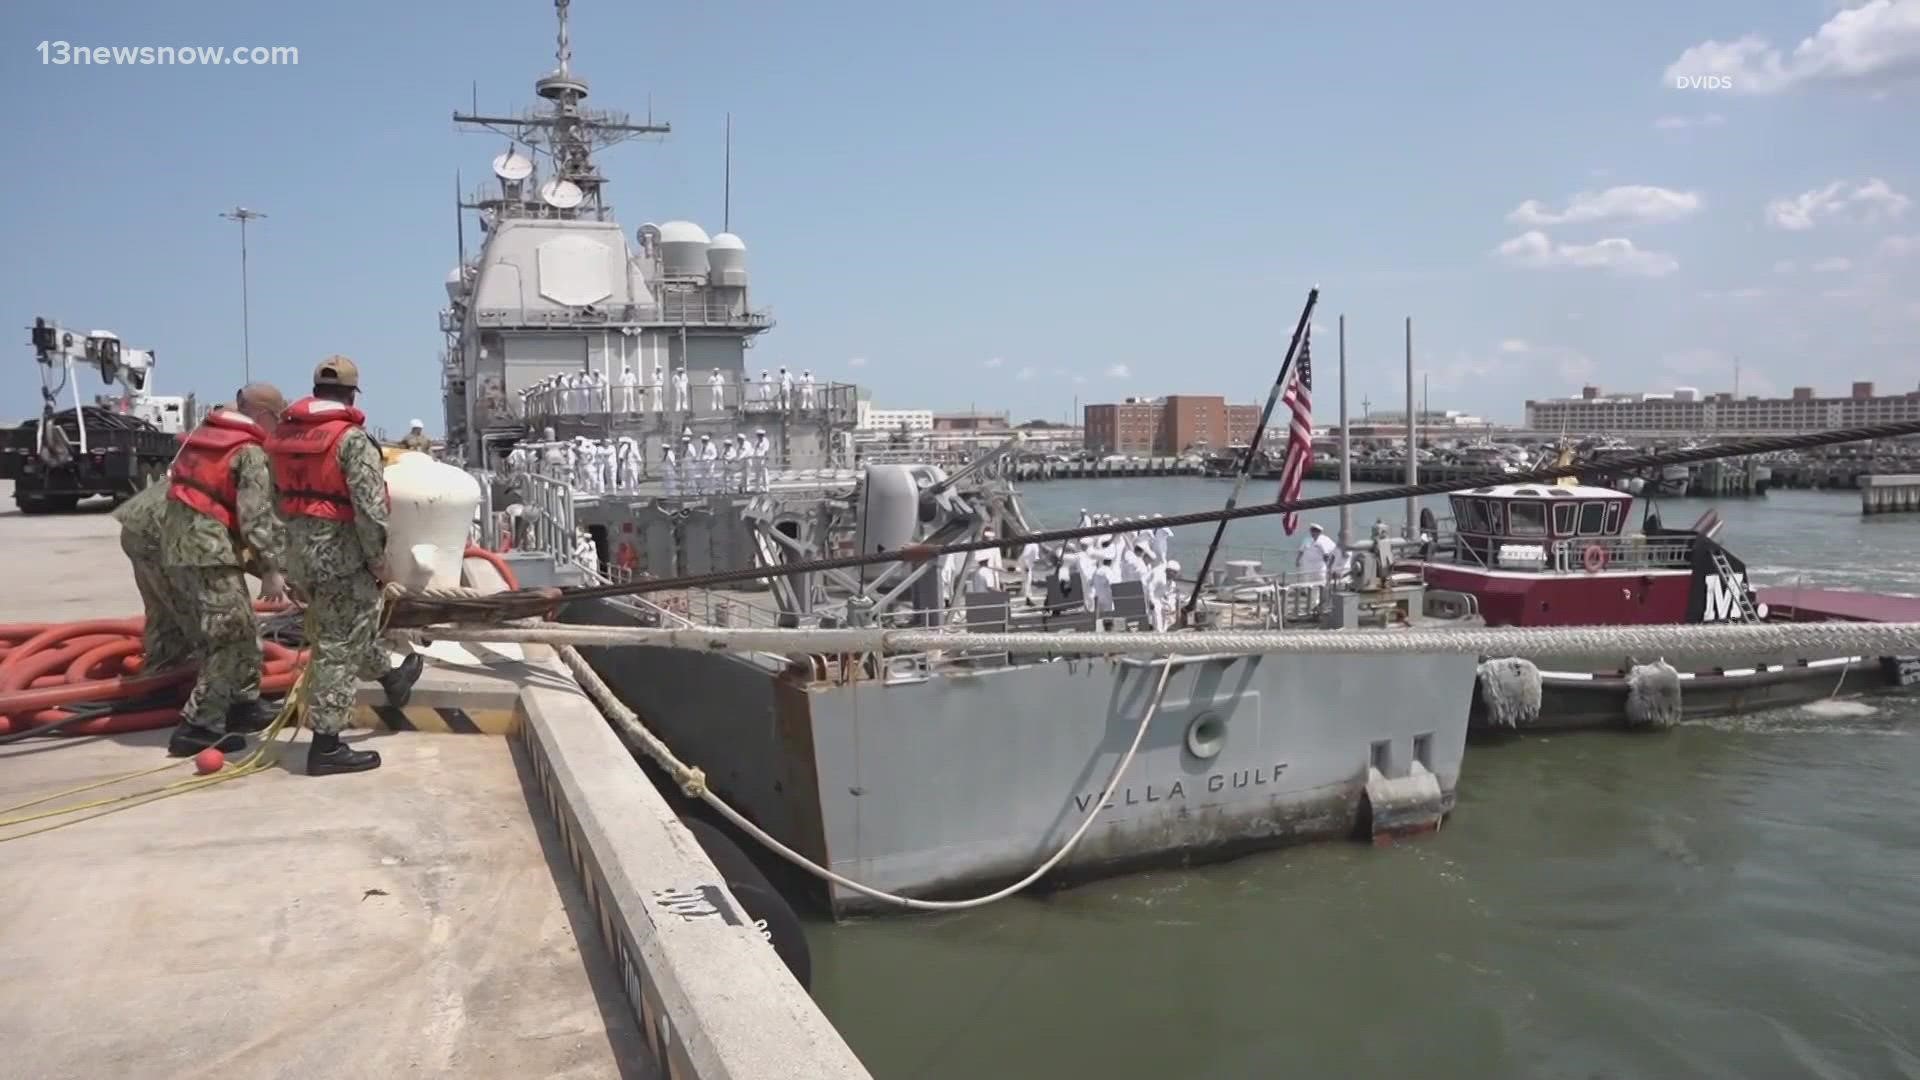 It's all part of an effort to reduce $66 million in the budget for U.S. Navy shore facilities.